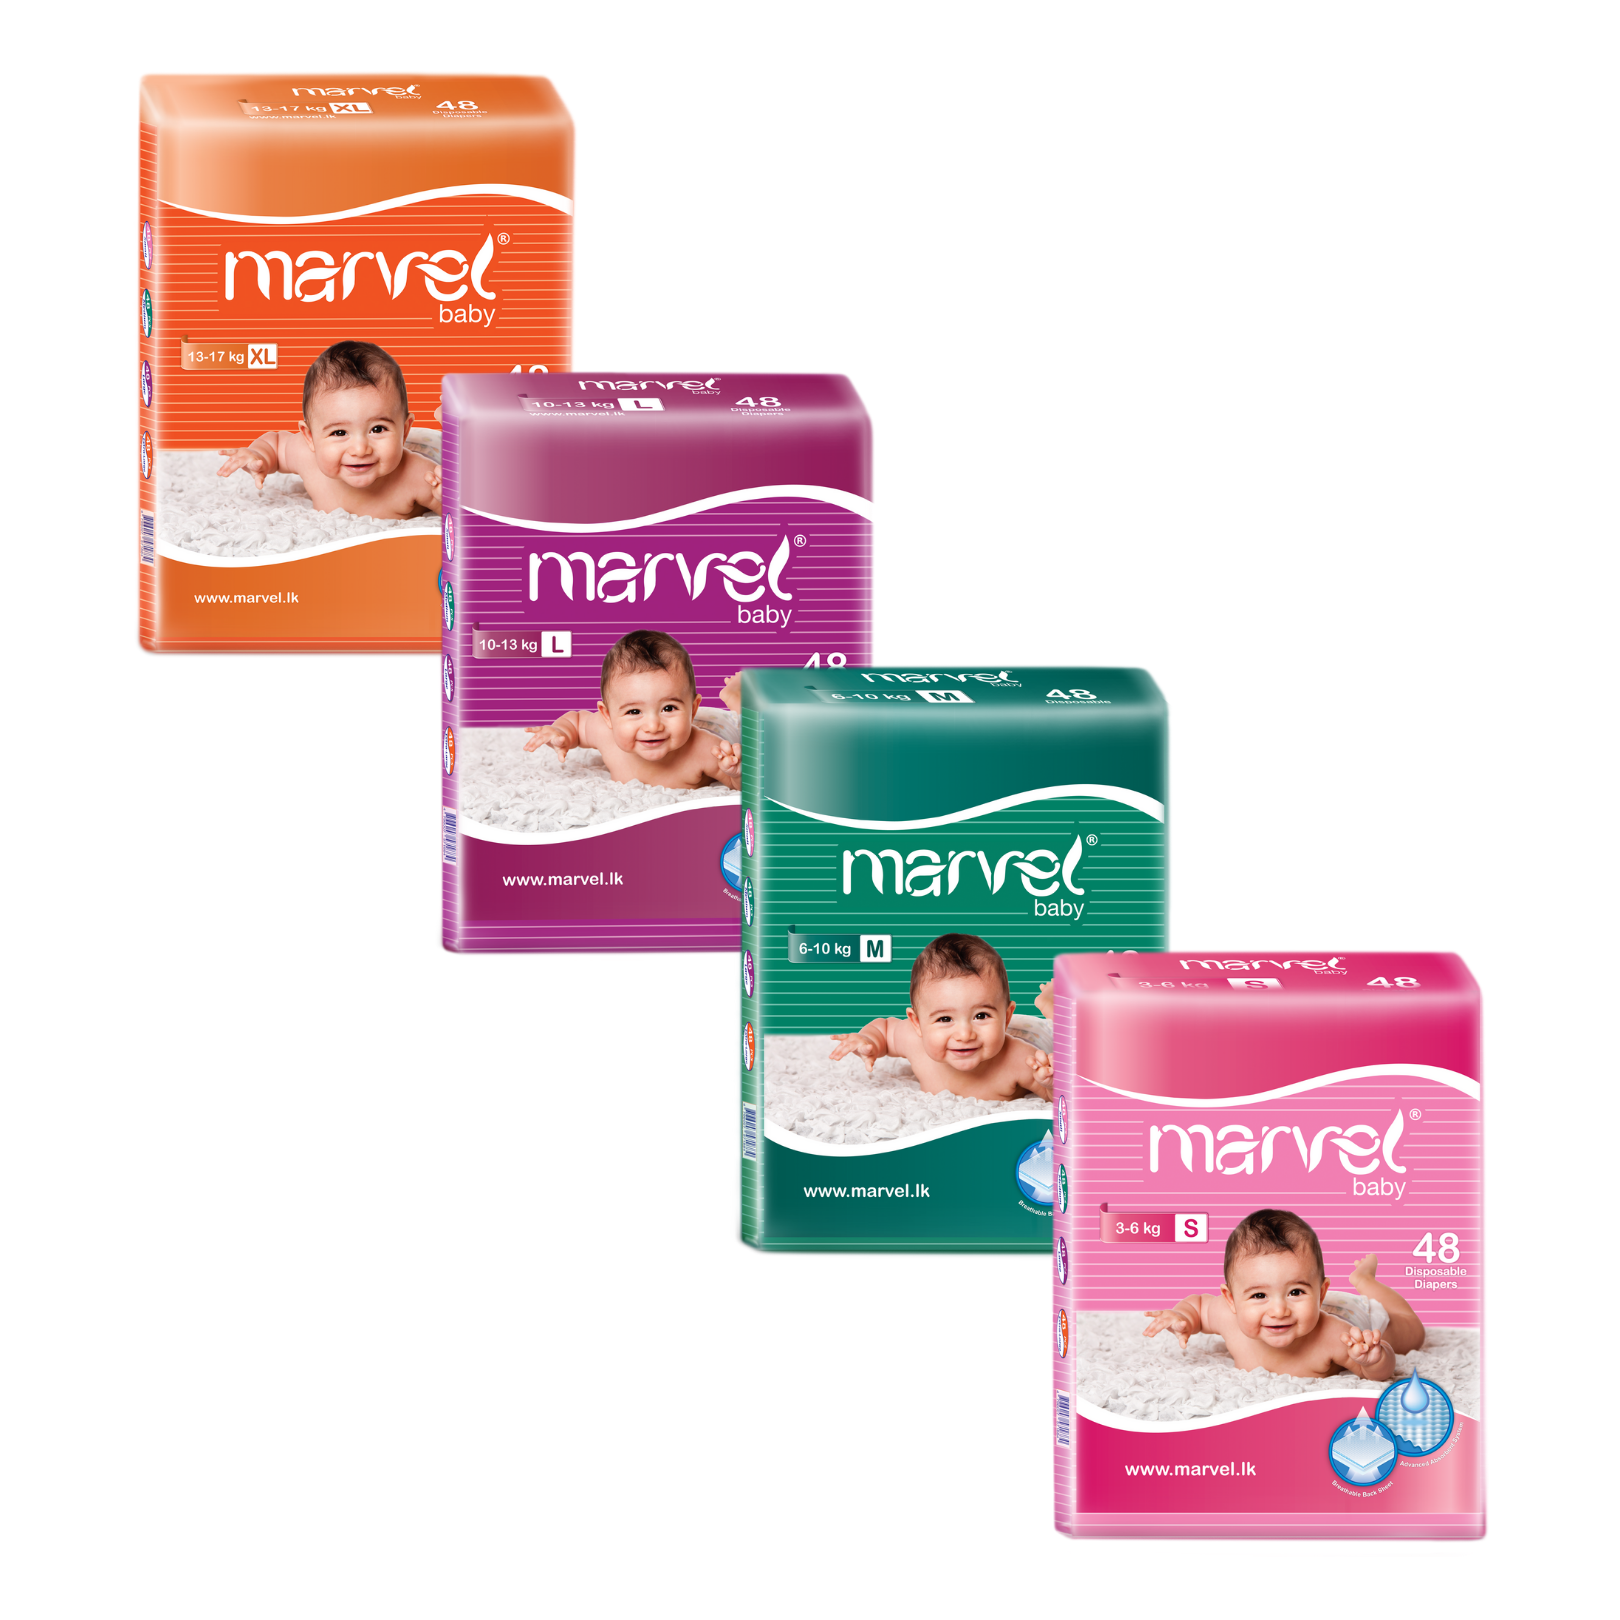 MARVEL BABY DIAPERS 48pcs PACK